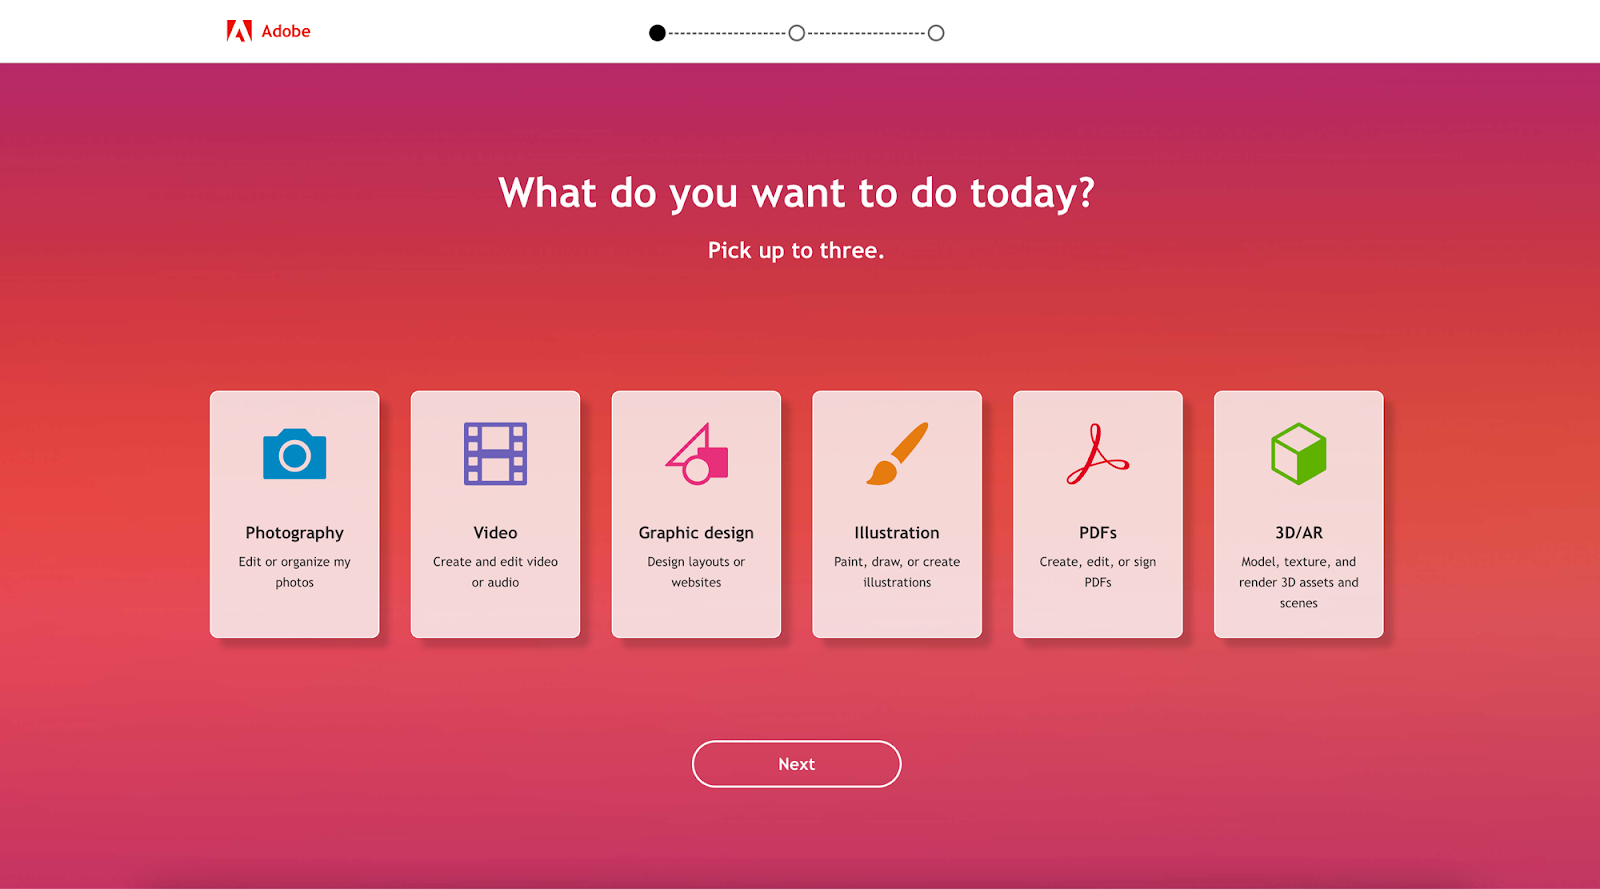 The first screen in Adobe Creative Cloud’s interactive quiz asks potential customers what they want to work on, including options like video and PDFs.